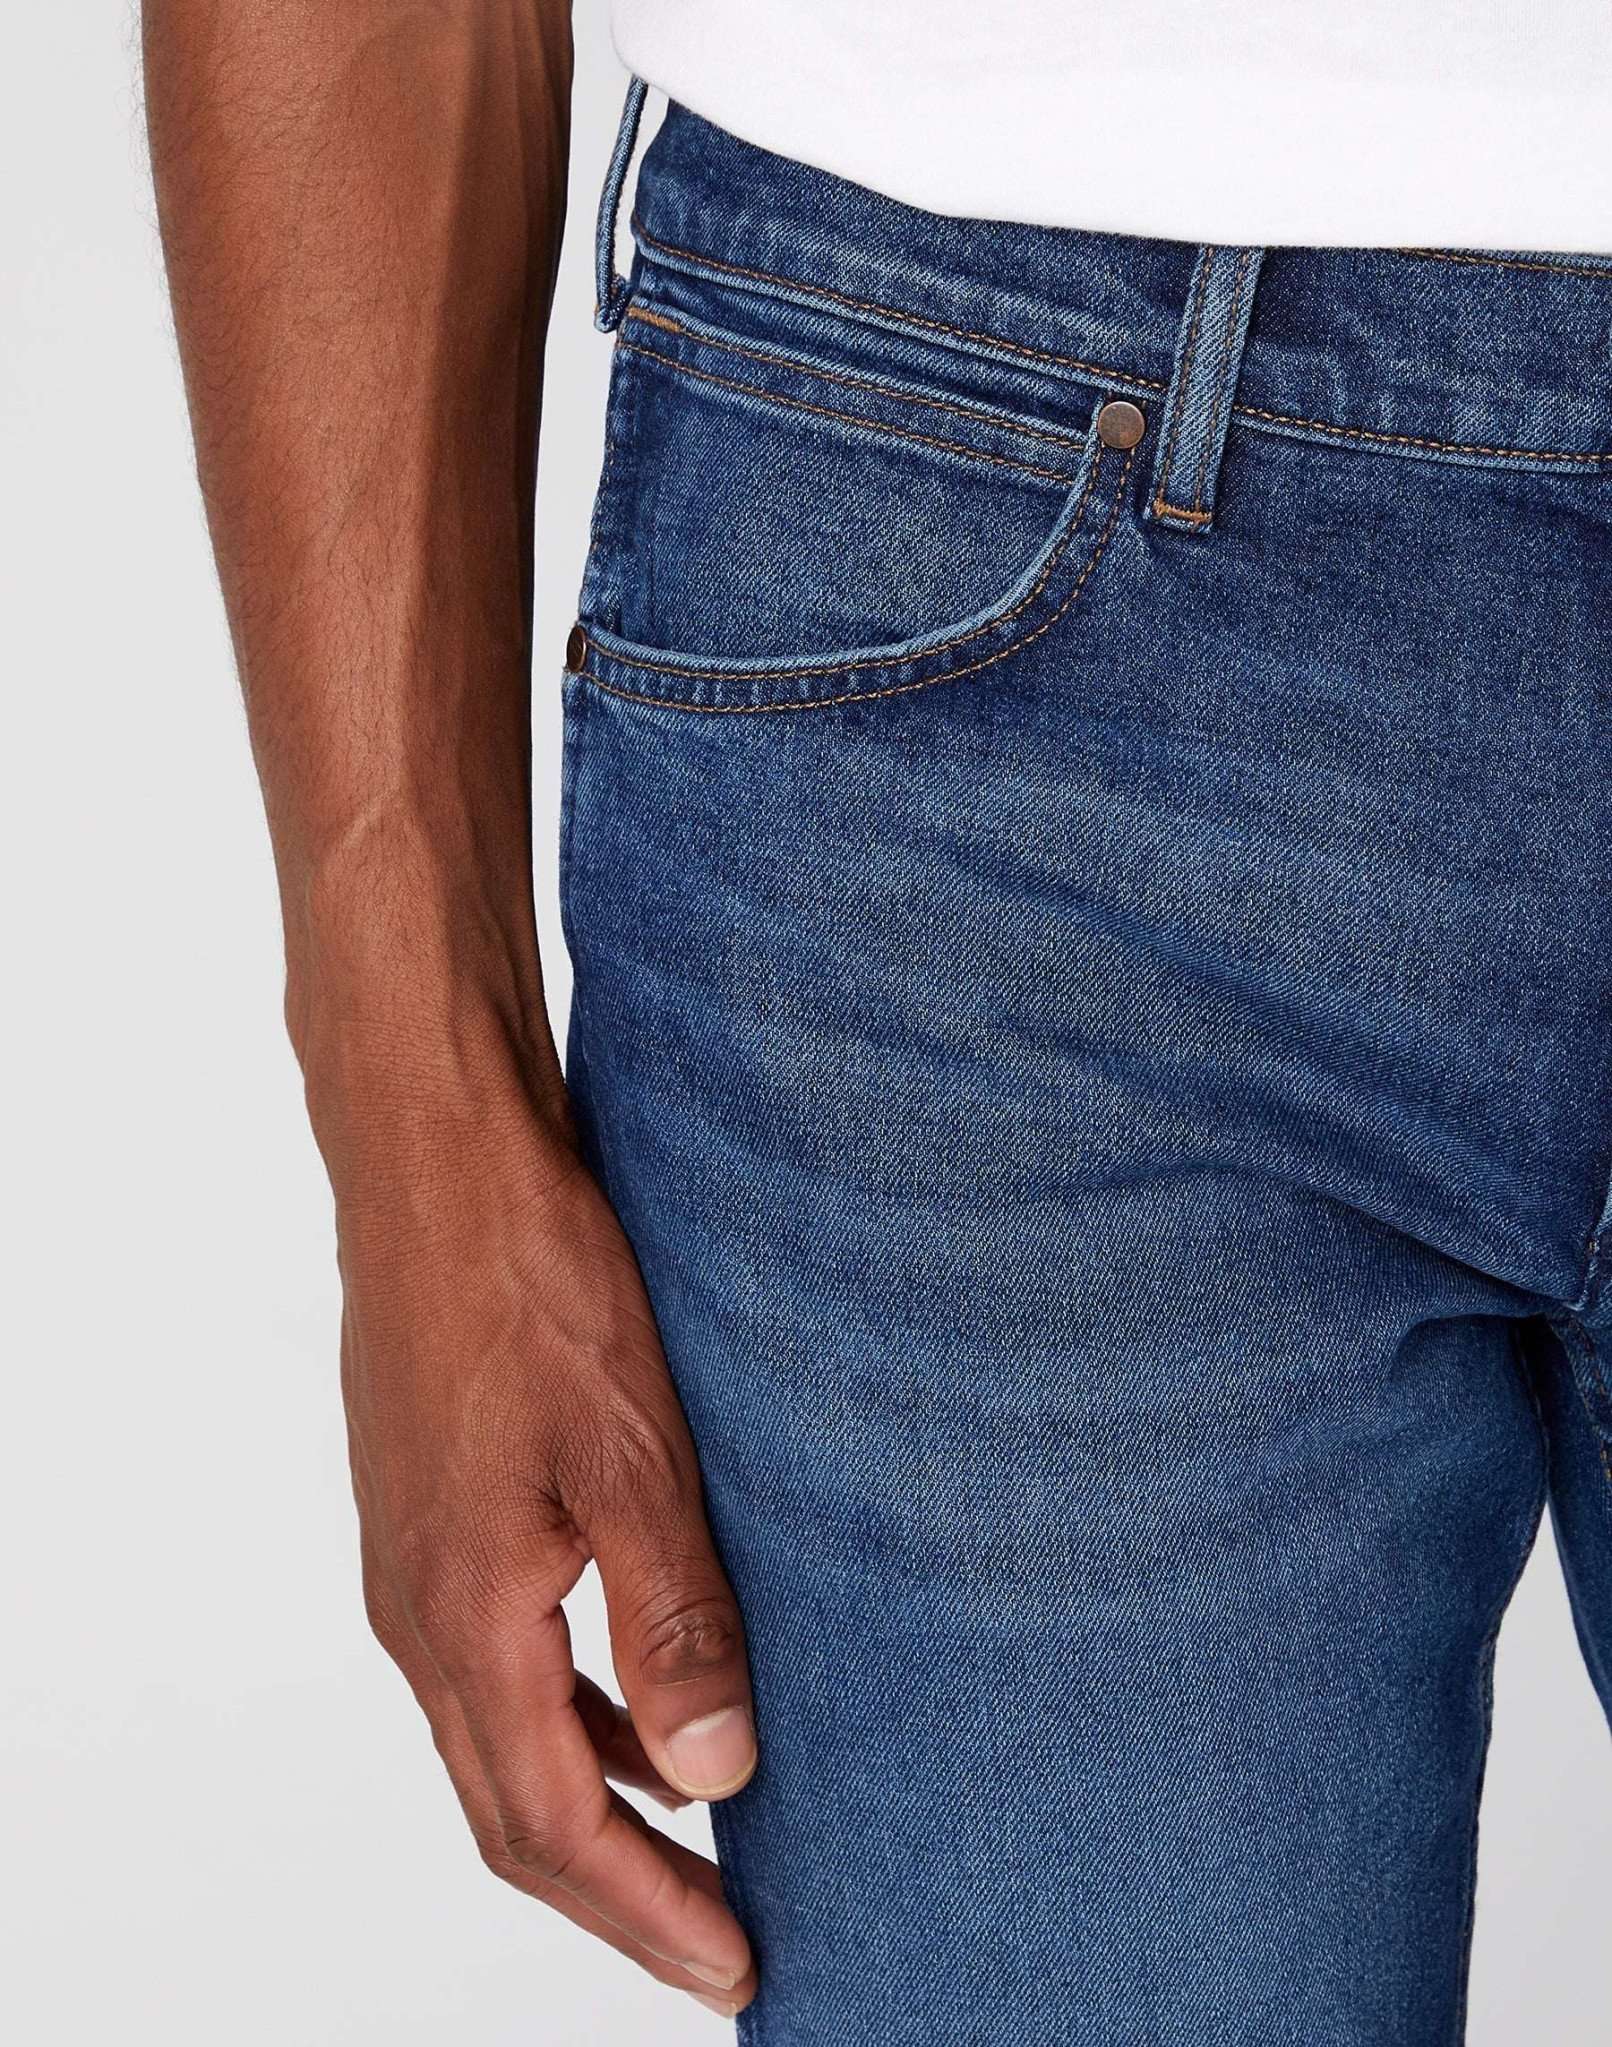 Greensboro Low Stretch in Blue Arcade Jeans Wrangler   